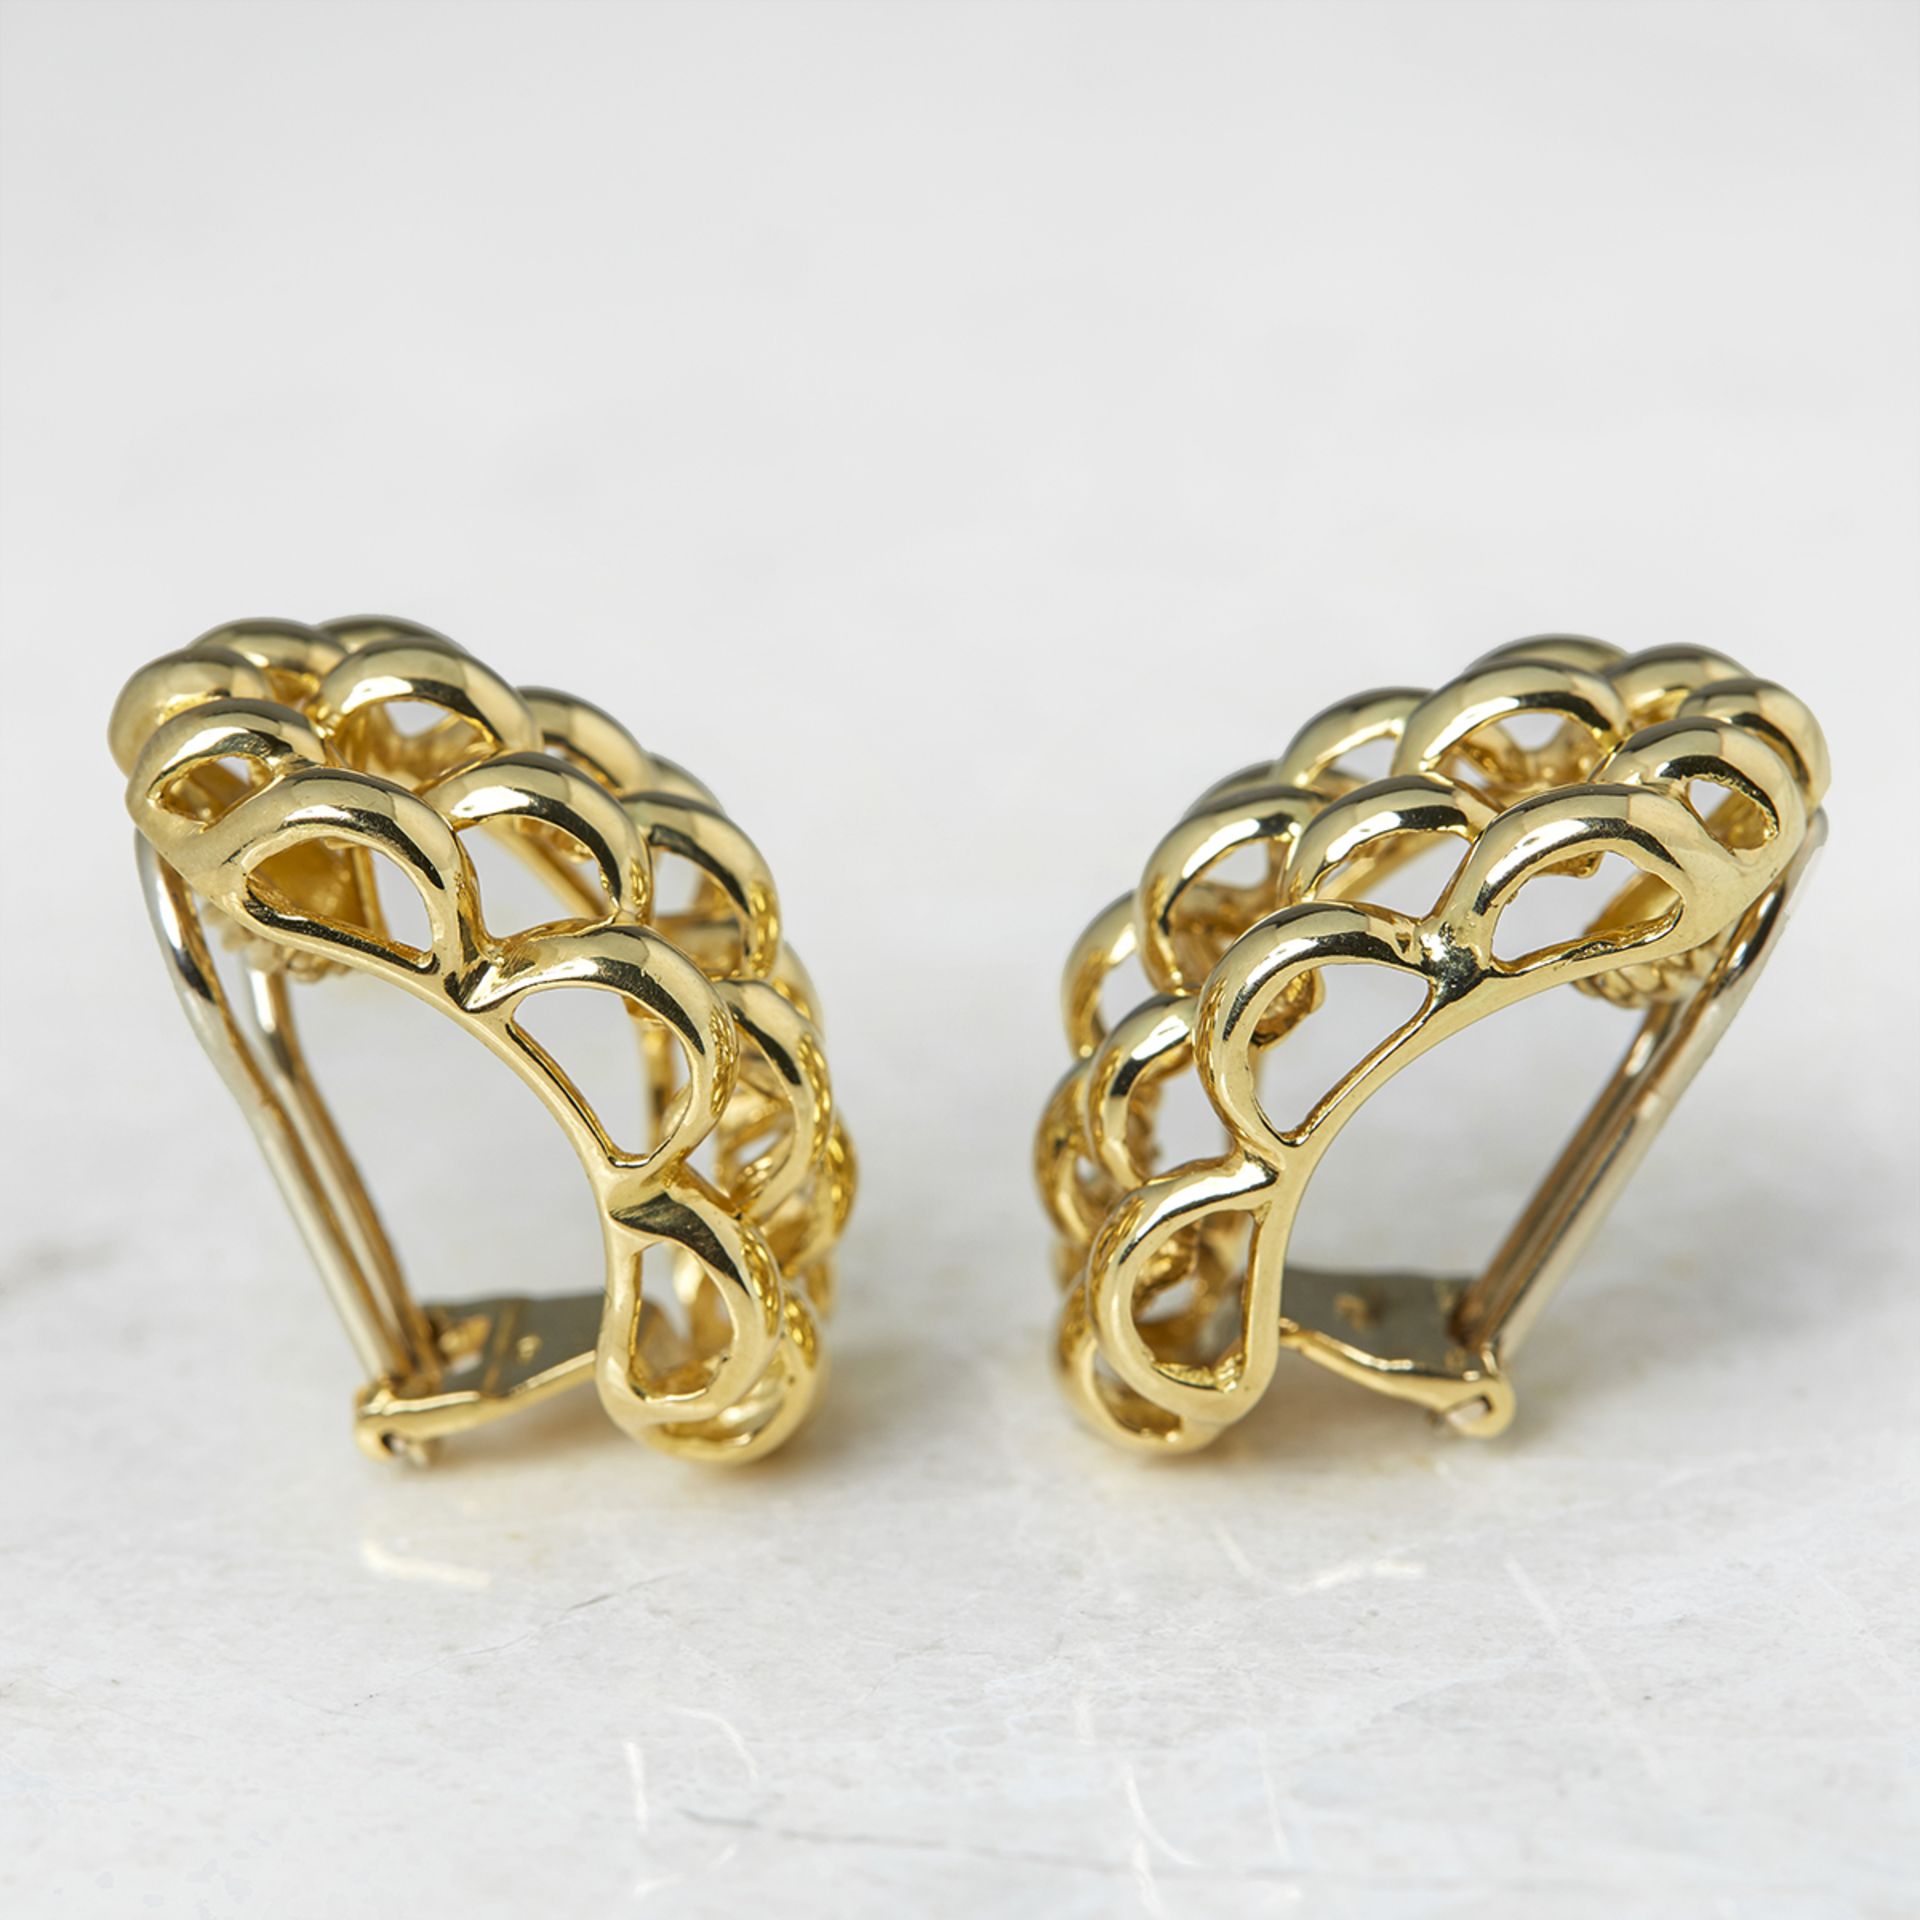 David Morris, 18k Yellow Gold Honeycomb Clip On Earrings - Image 3 of 6